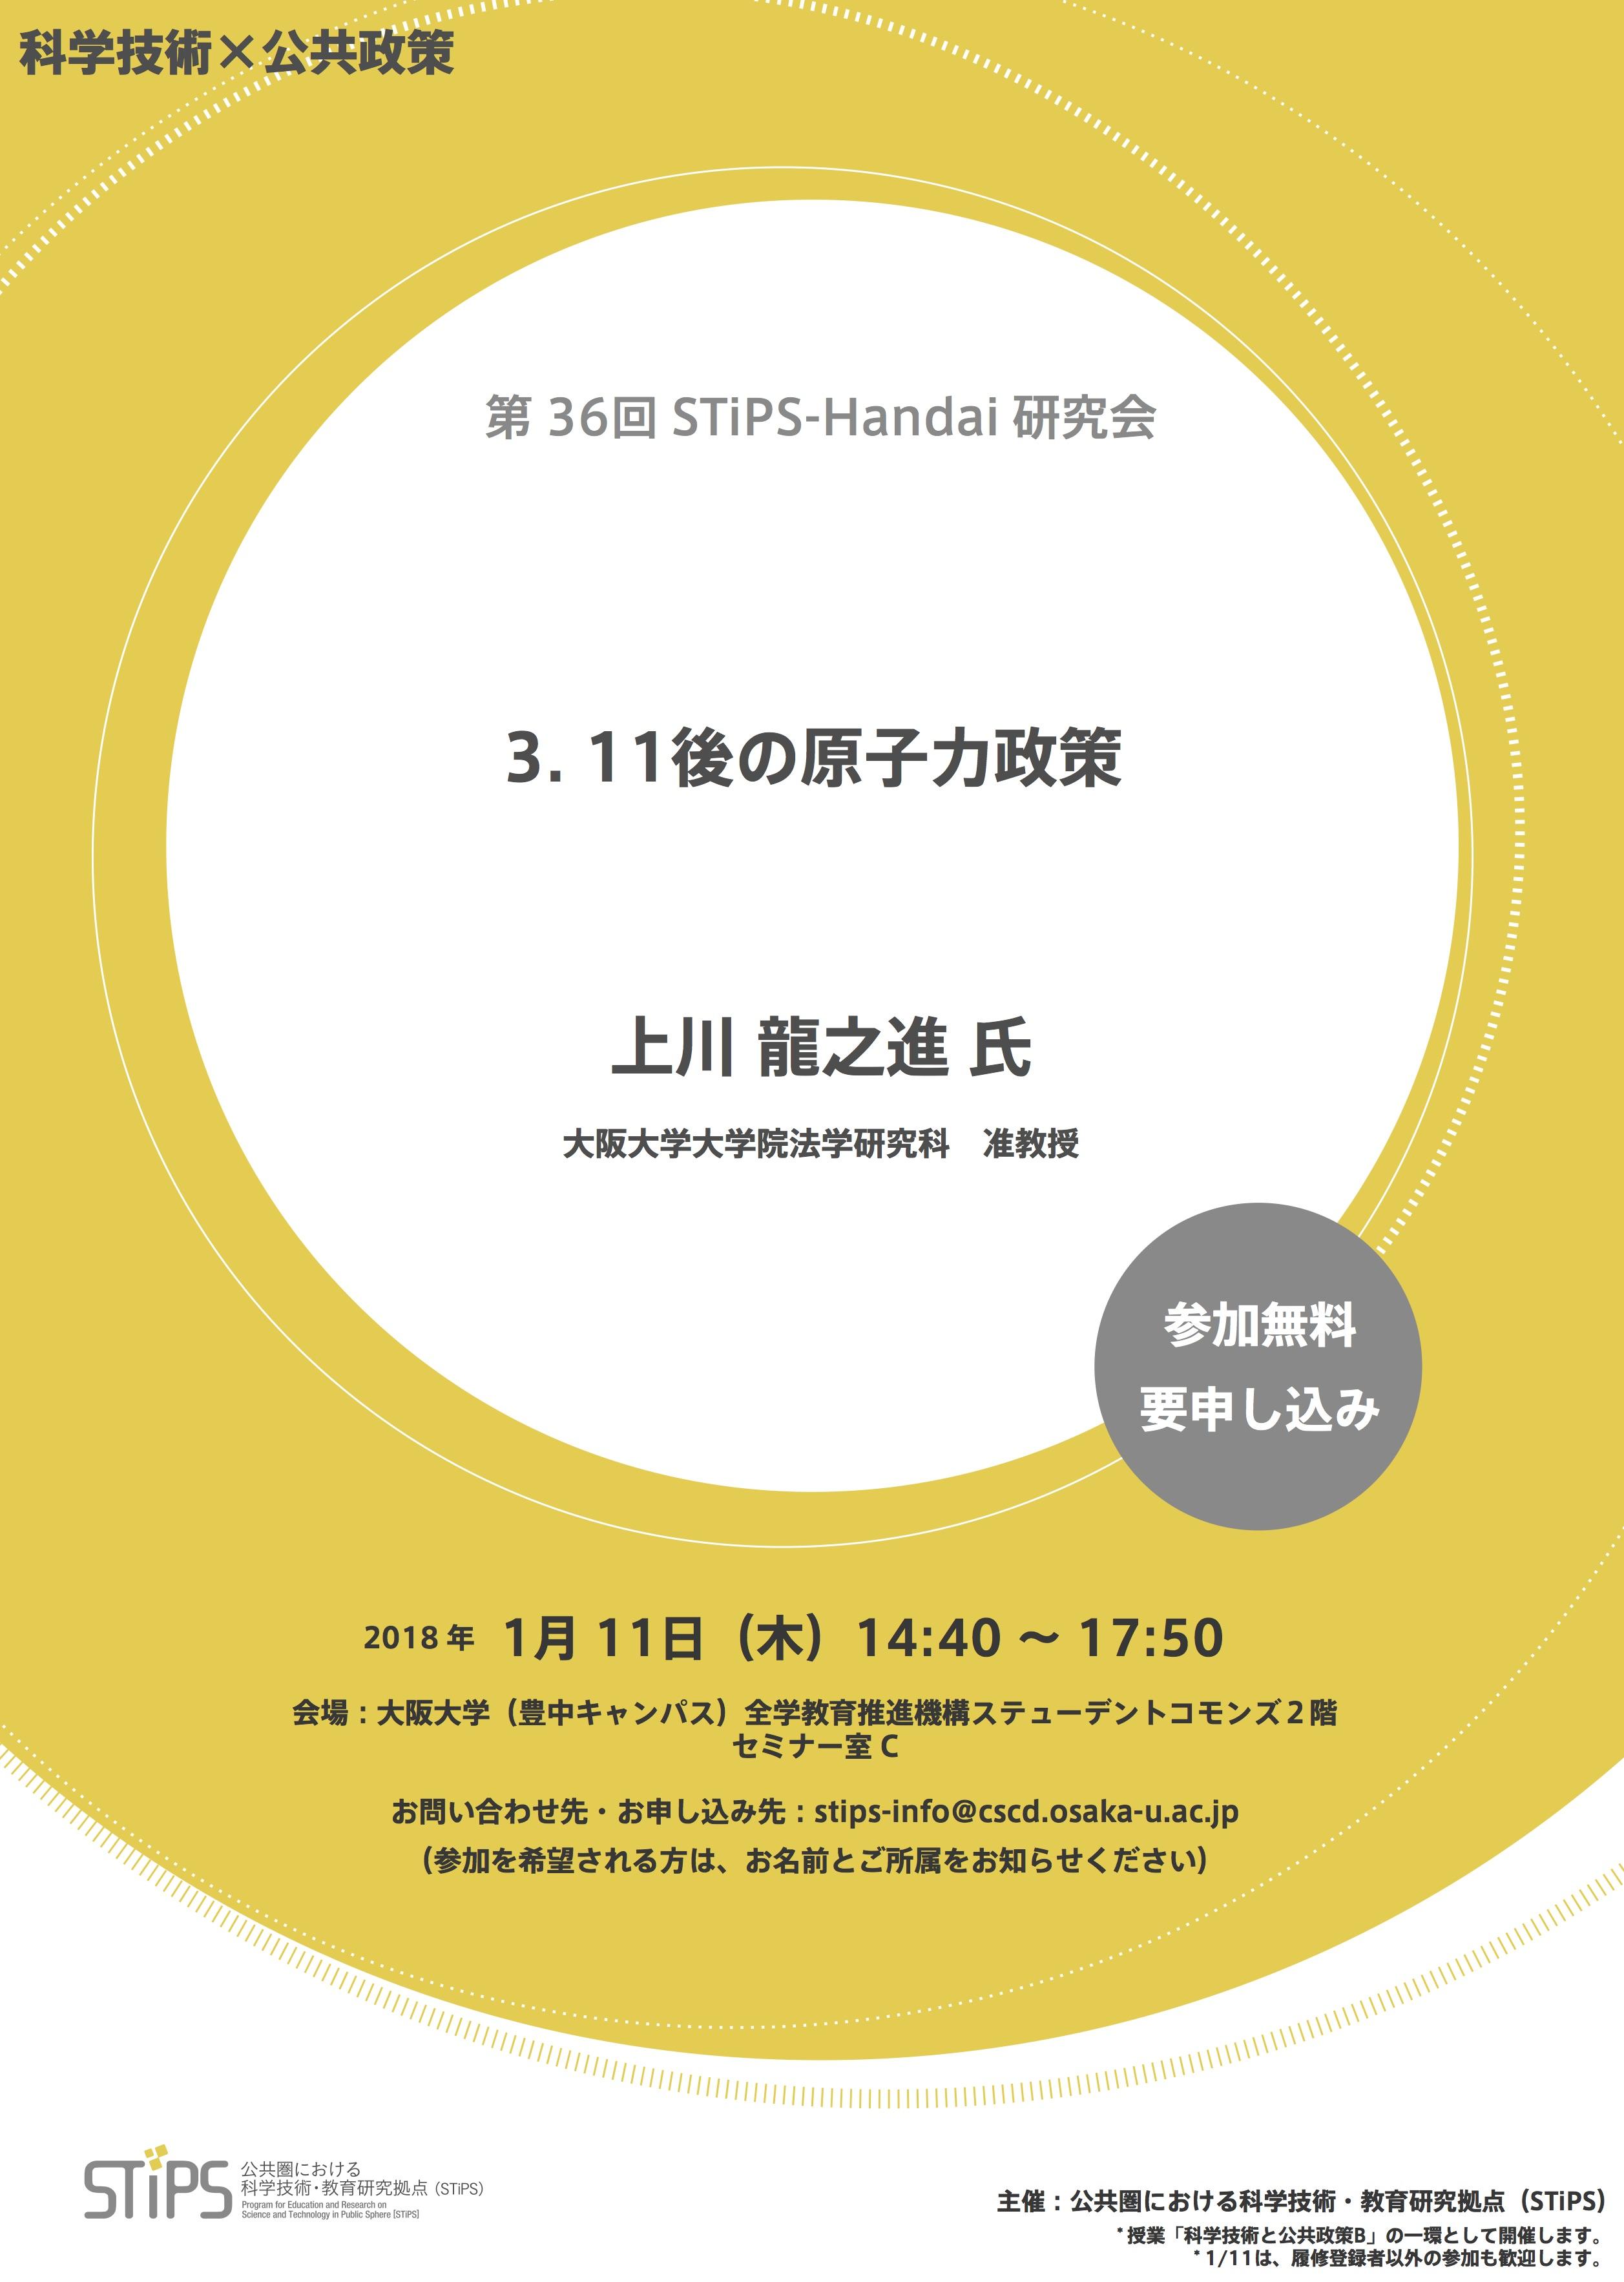 http://scirex.grips.ac.jp/events/Flyer_for180111.jpg